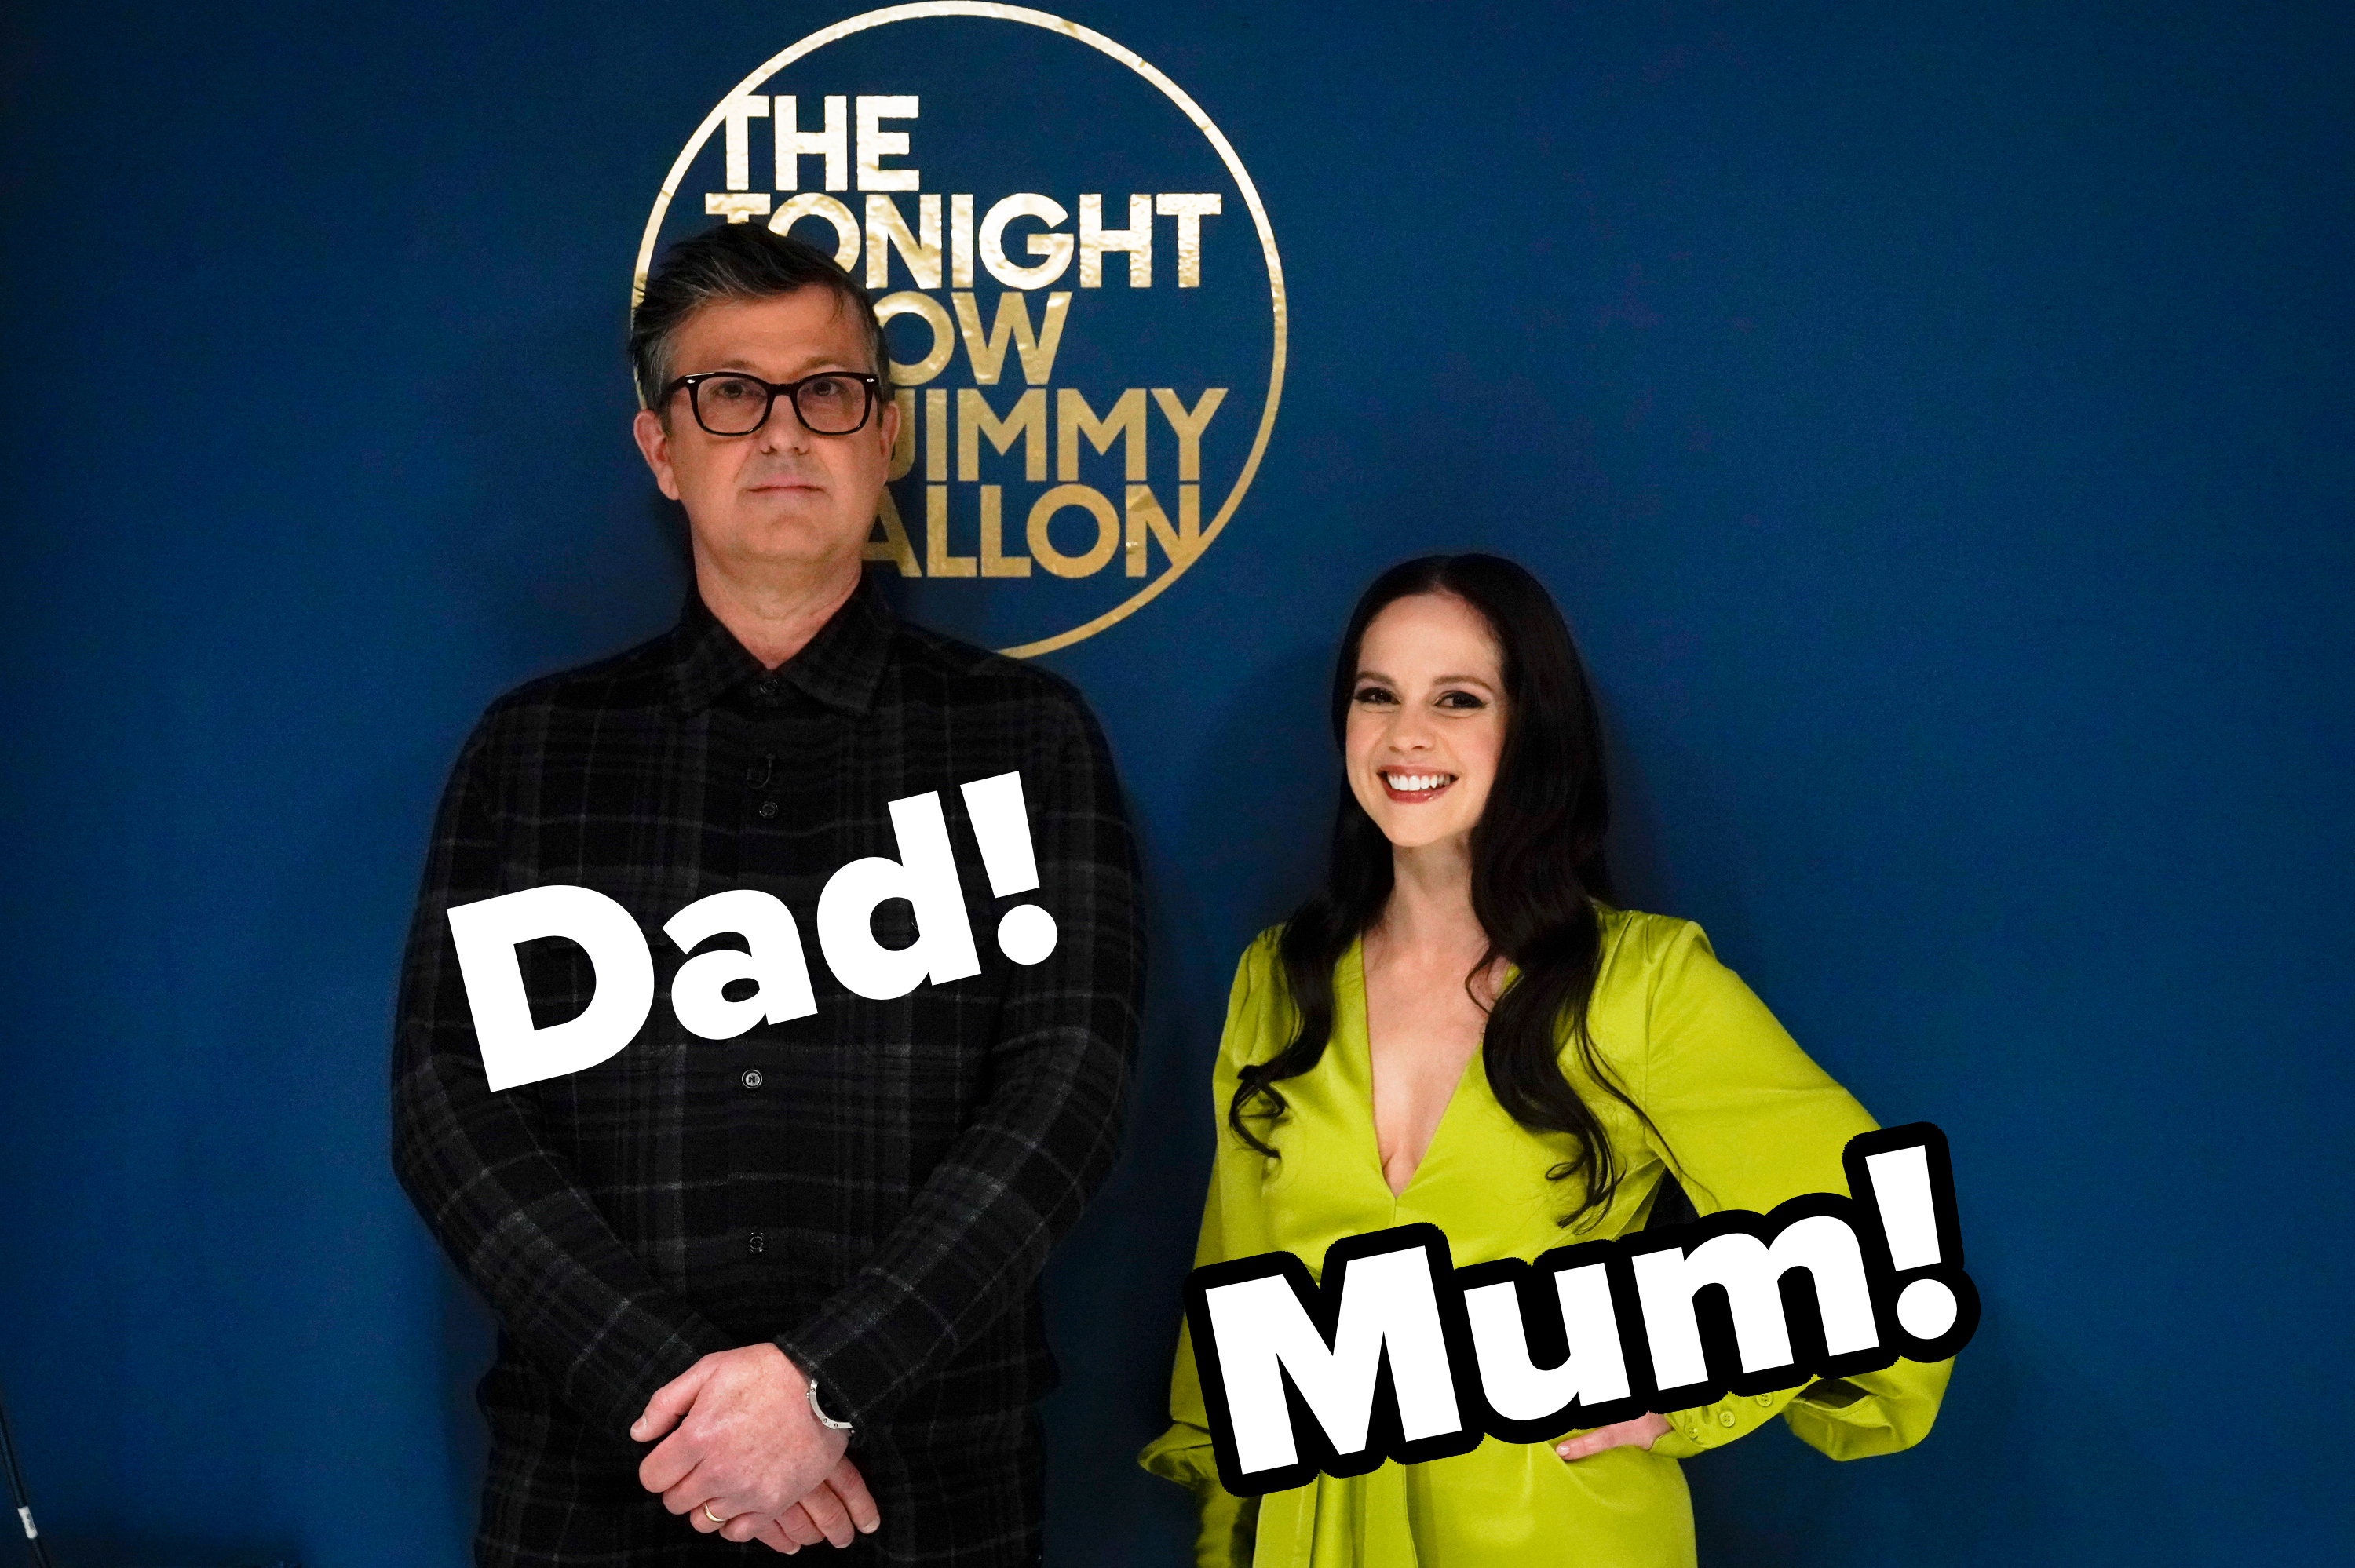 Dave and Melanie at the tonight show with the captions dad and mum